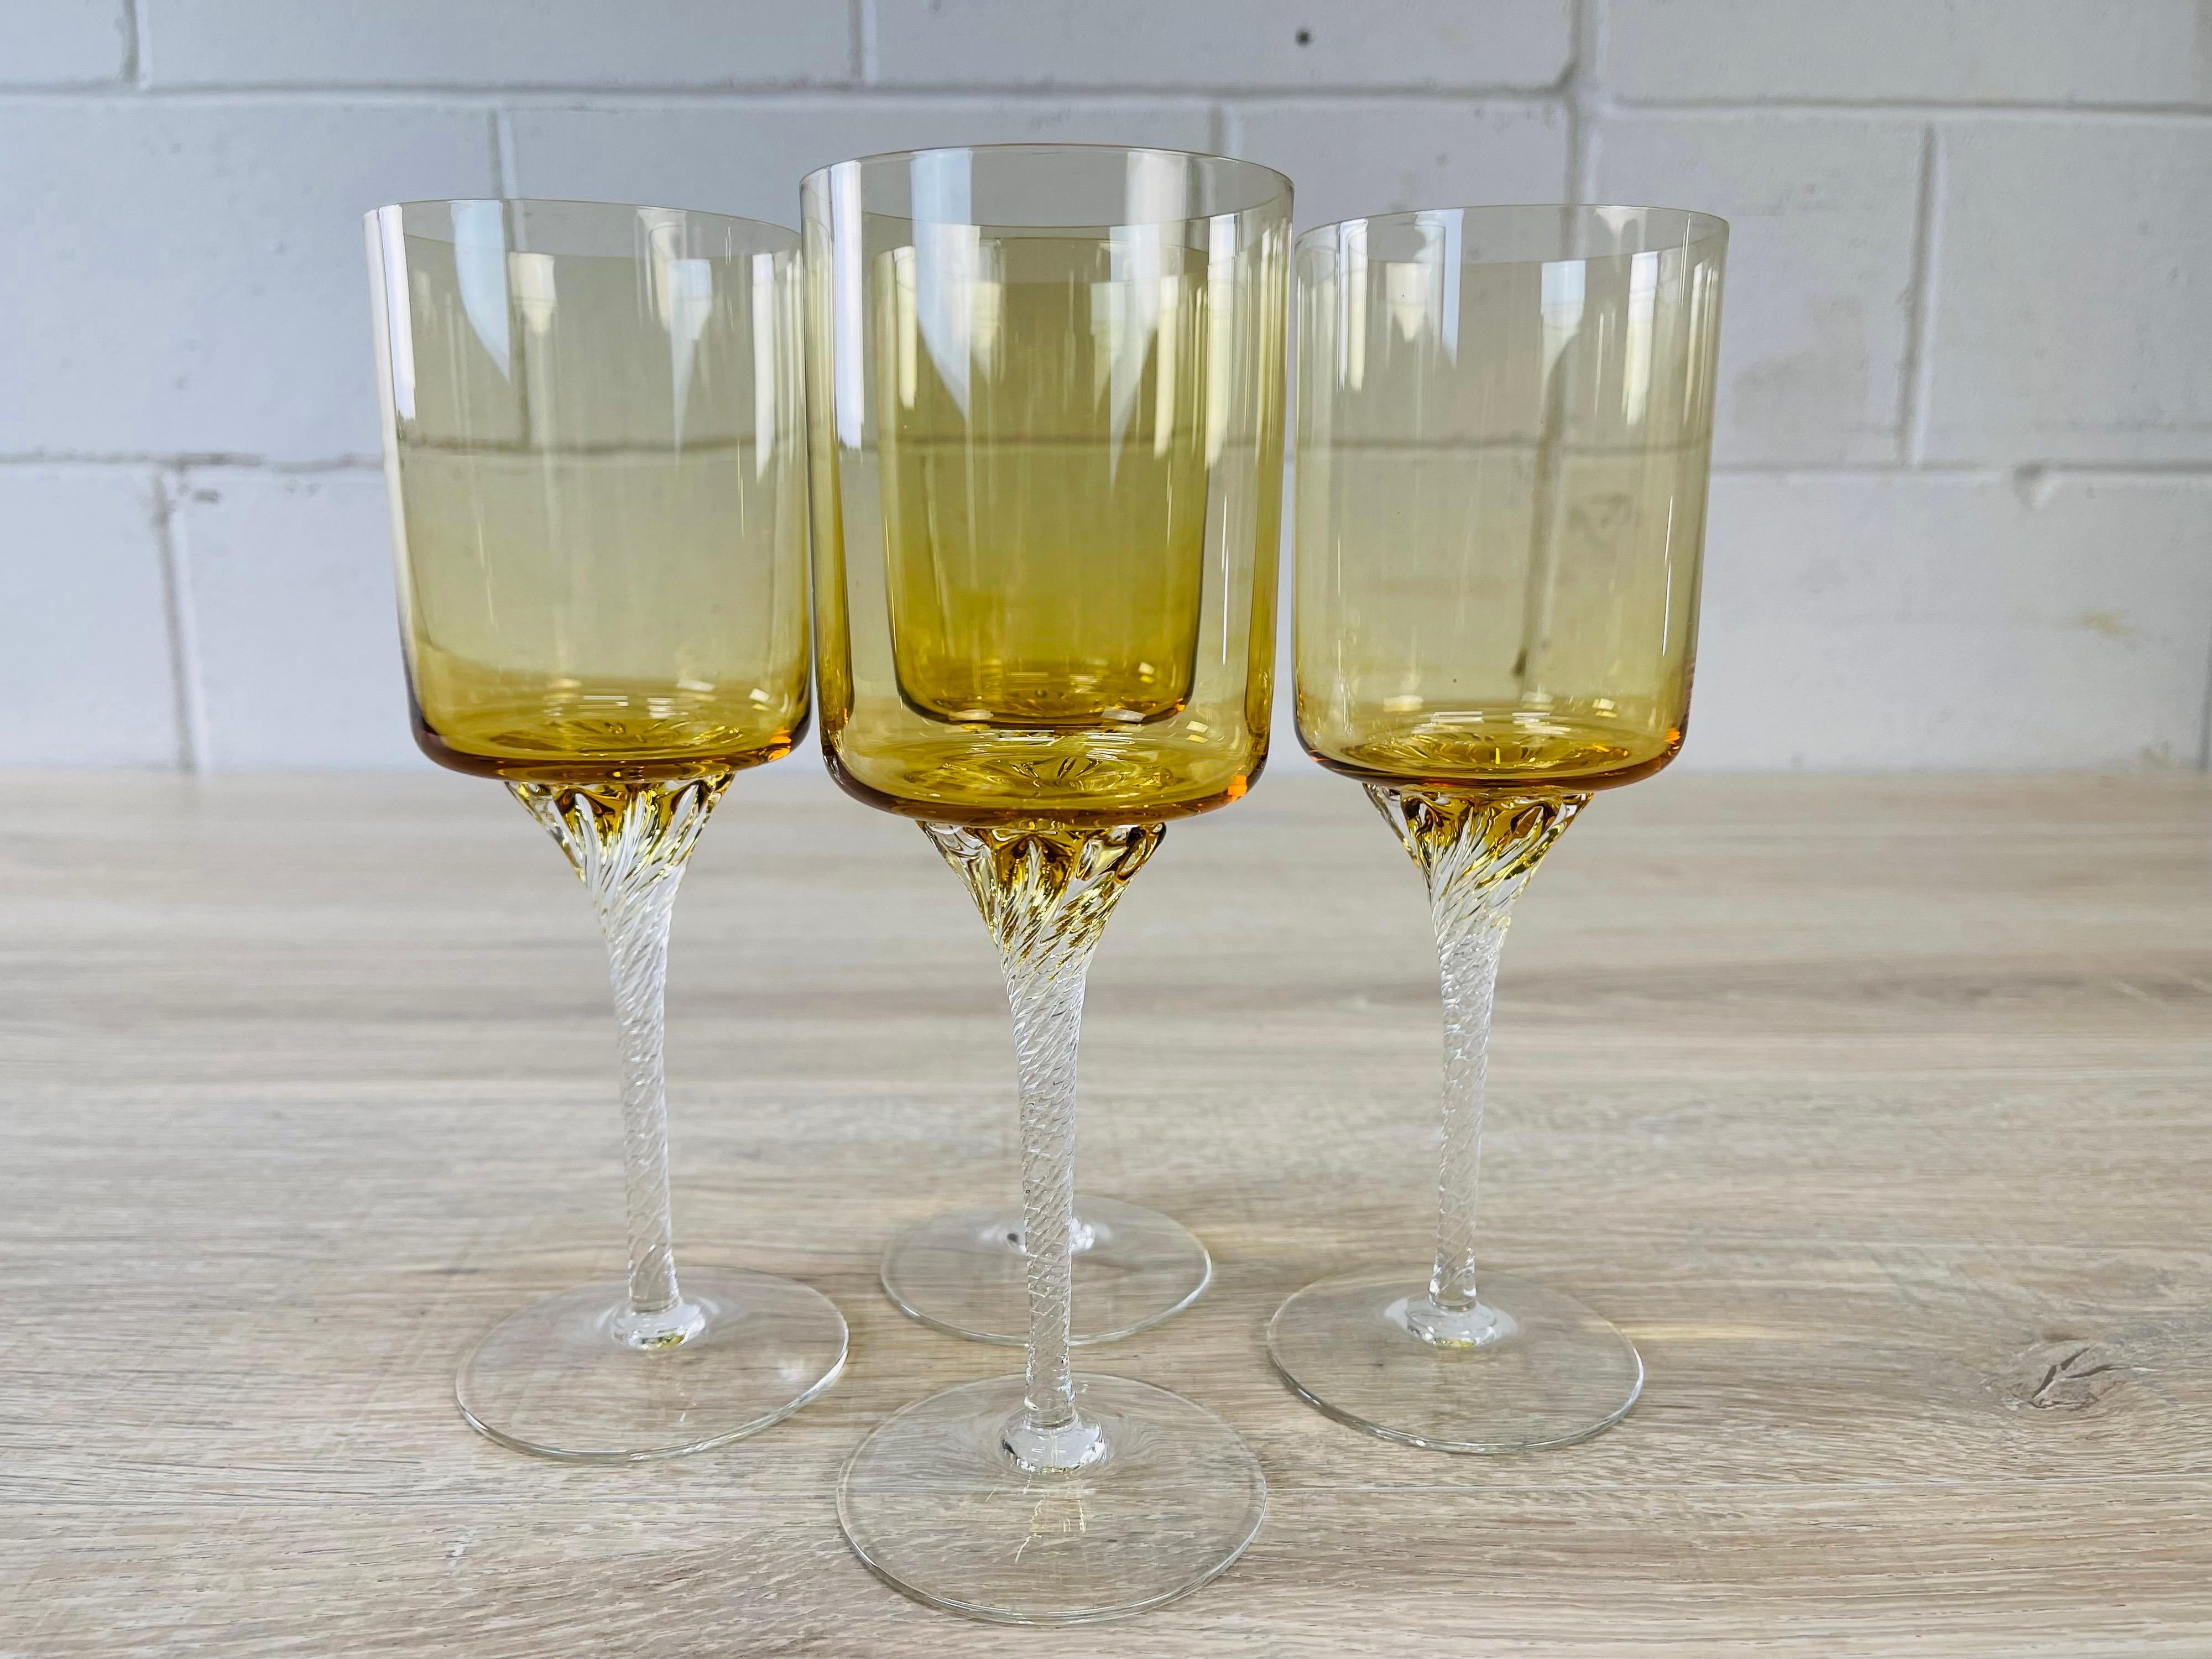 Vintage 1960s set of 4 tall amber glass wine goblets with twisted stems. No marks.